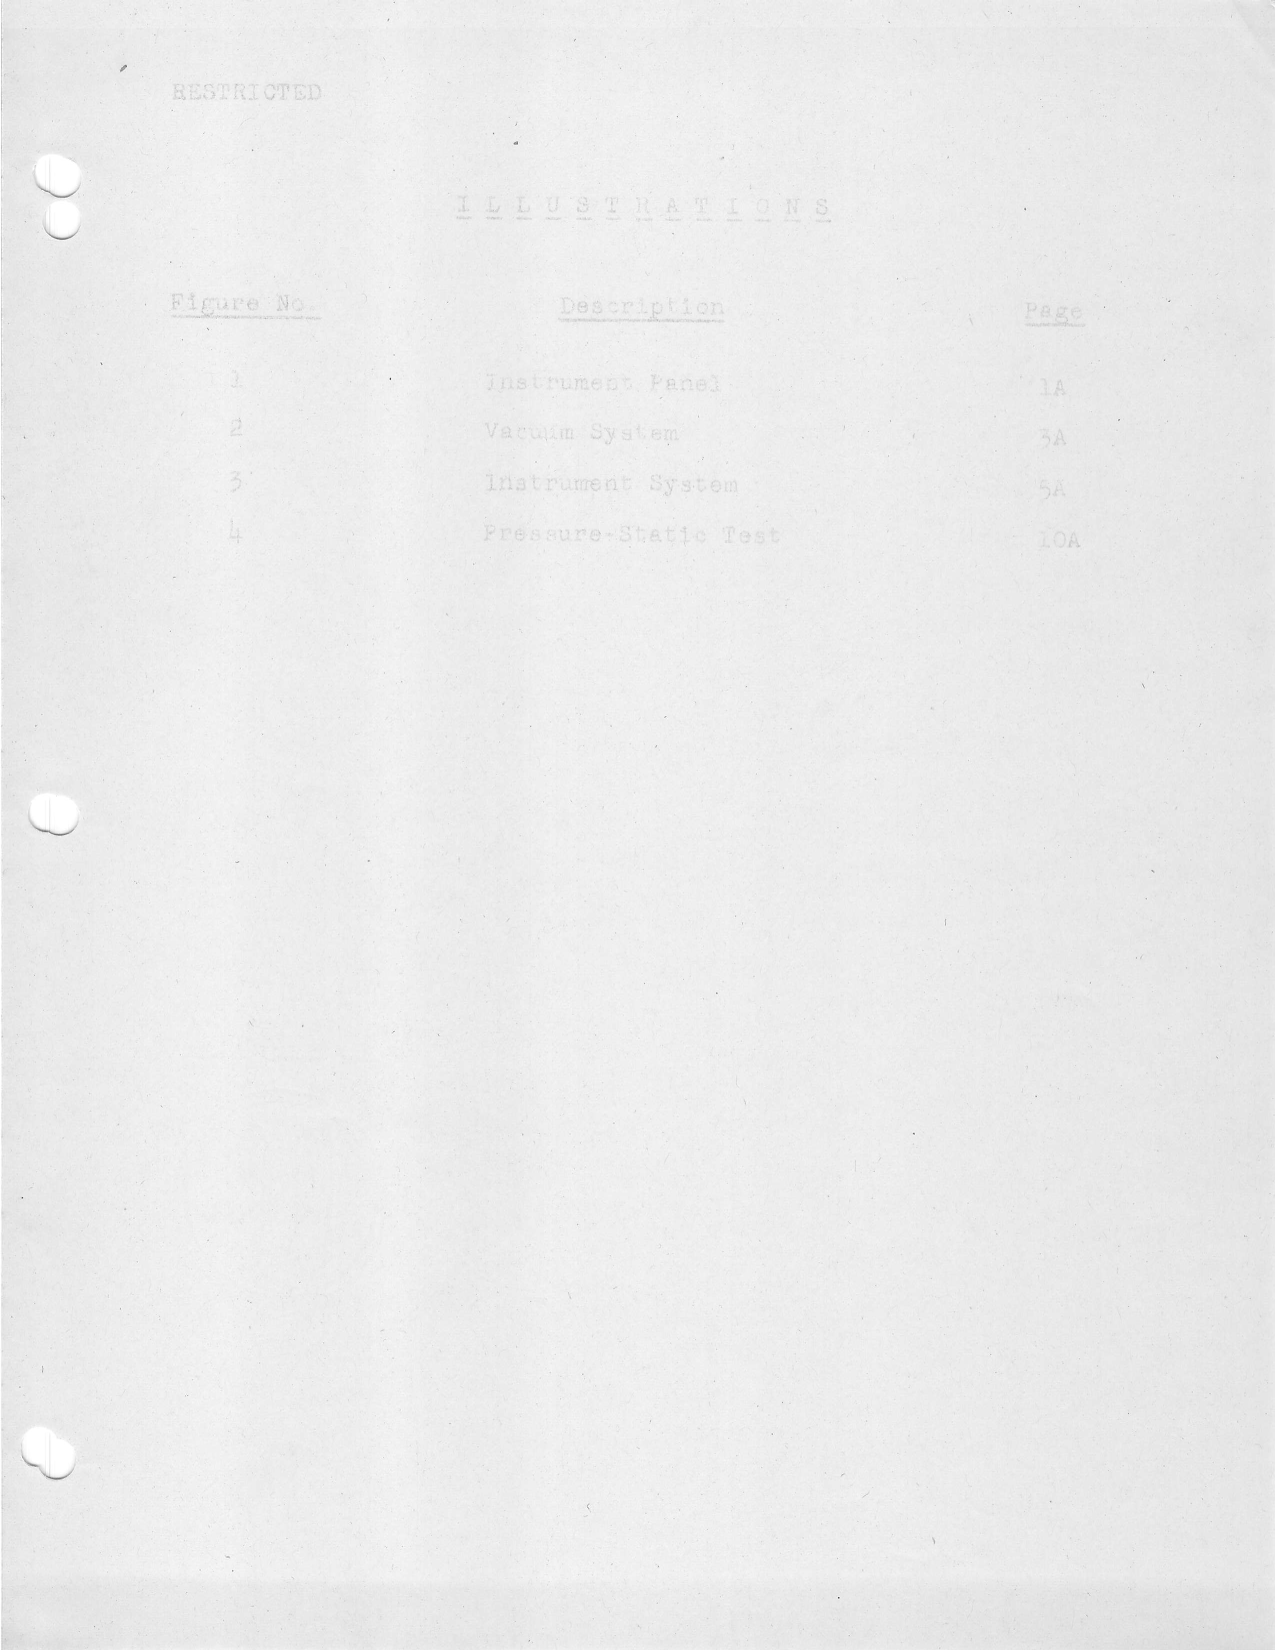 Sample page 251 from AirCorps Library document: Service School Lectures - P-51